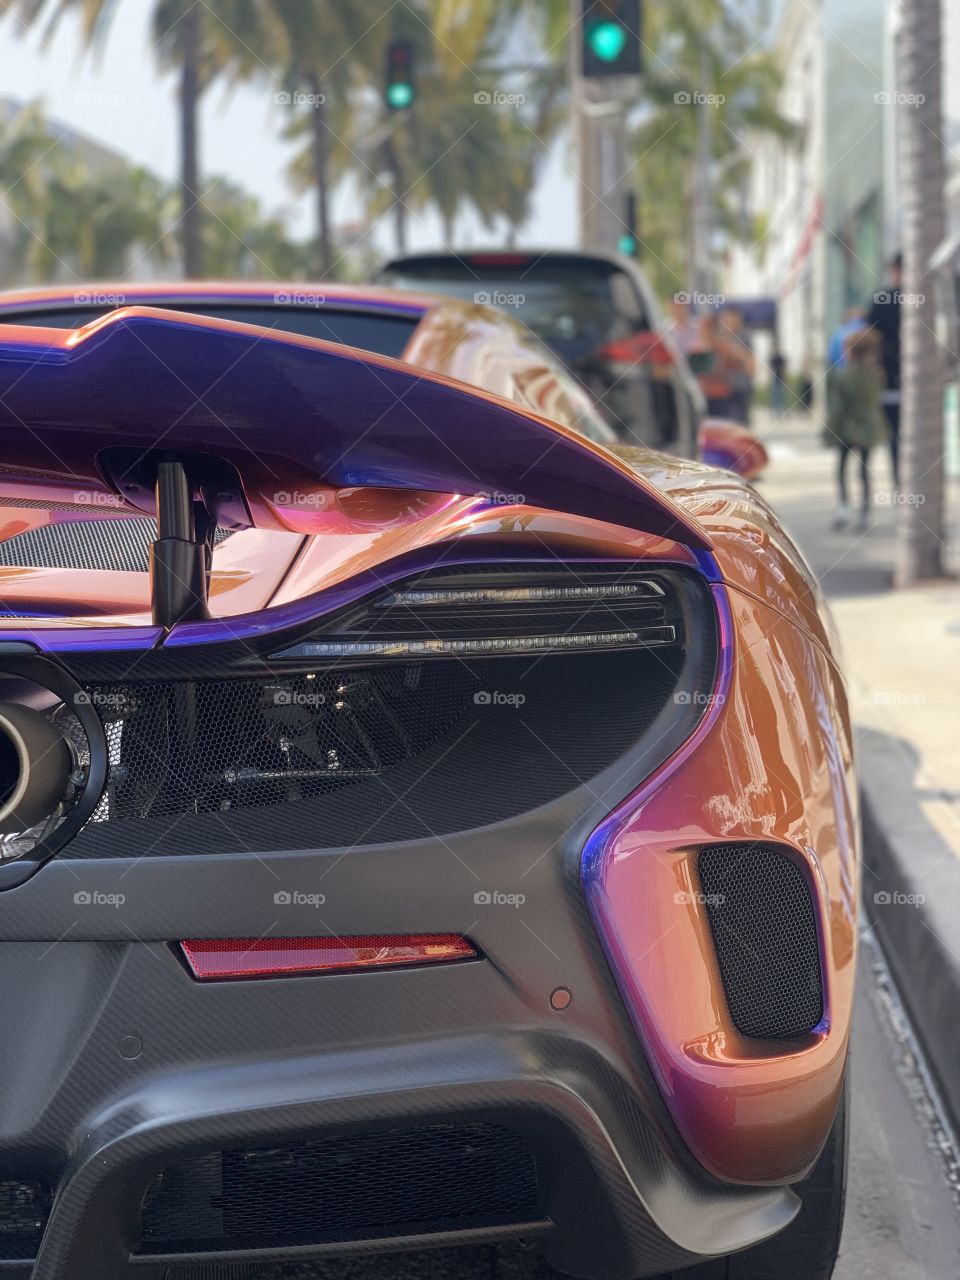 Great snap of the back of this two tone mclaren